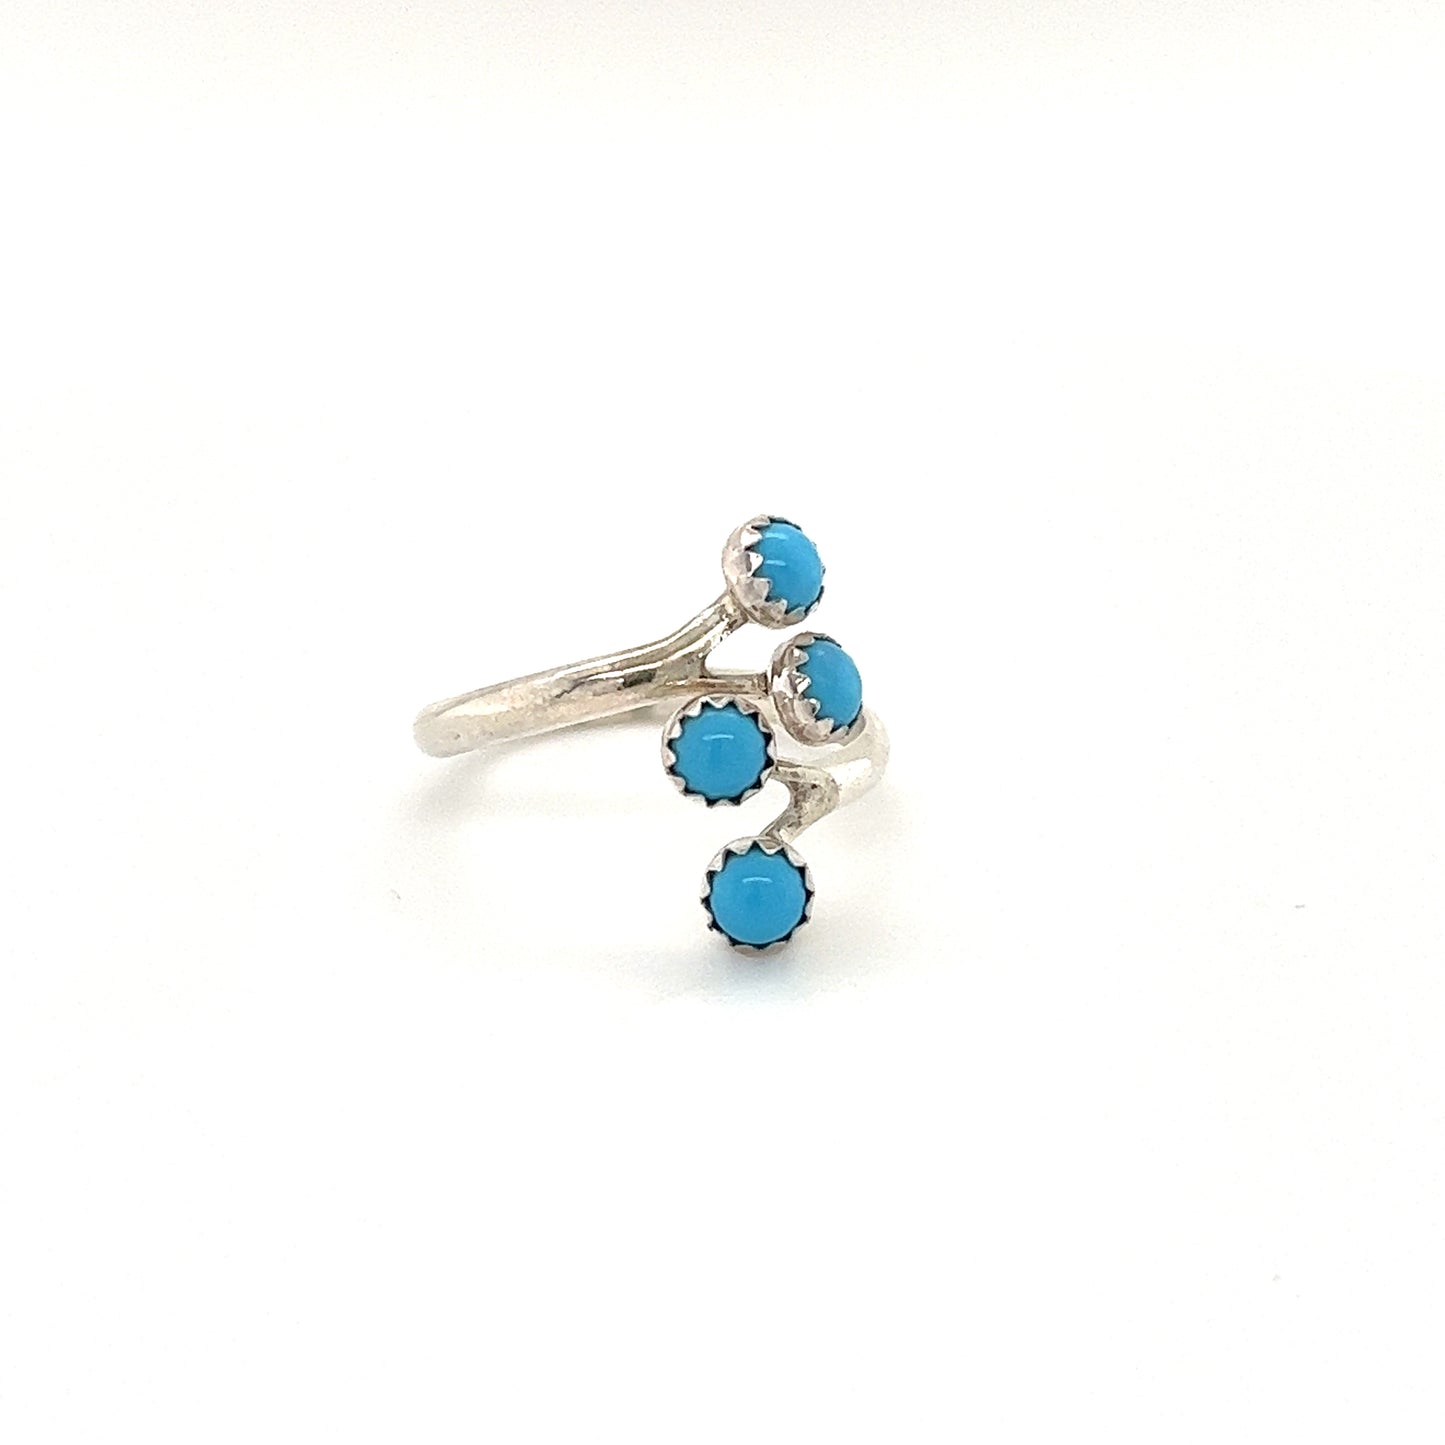 A Handmade Turquoise Wrap Ring with three turquoise stones on a white background.